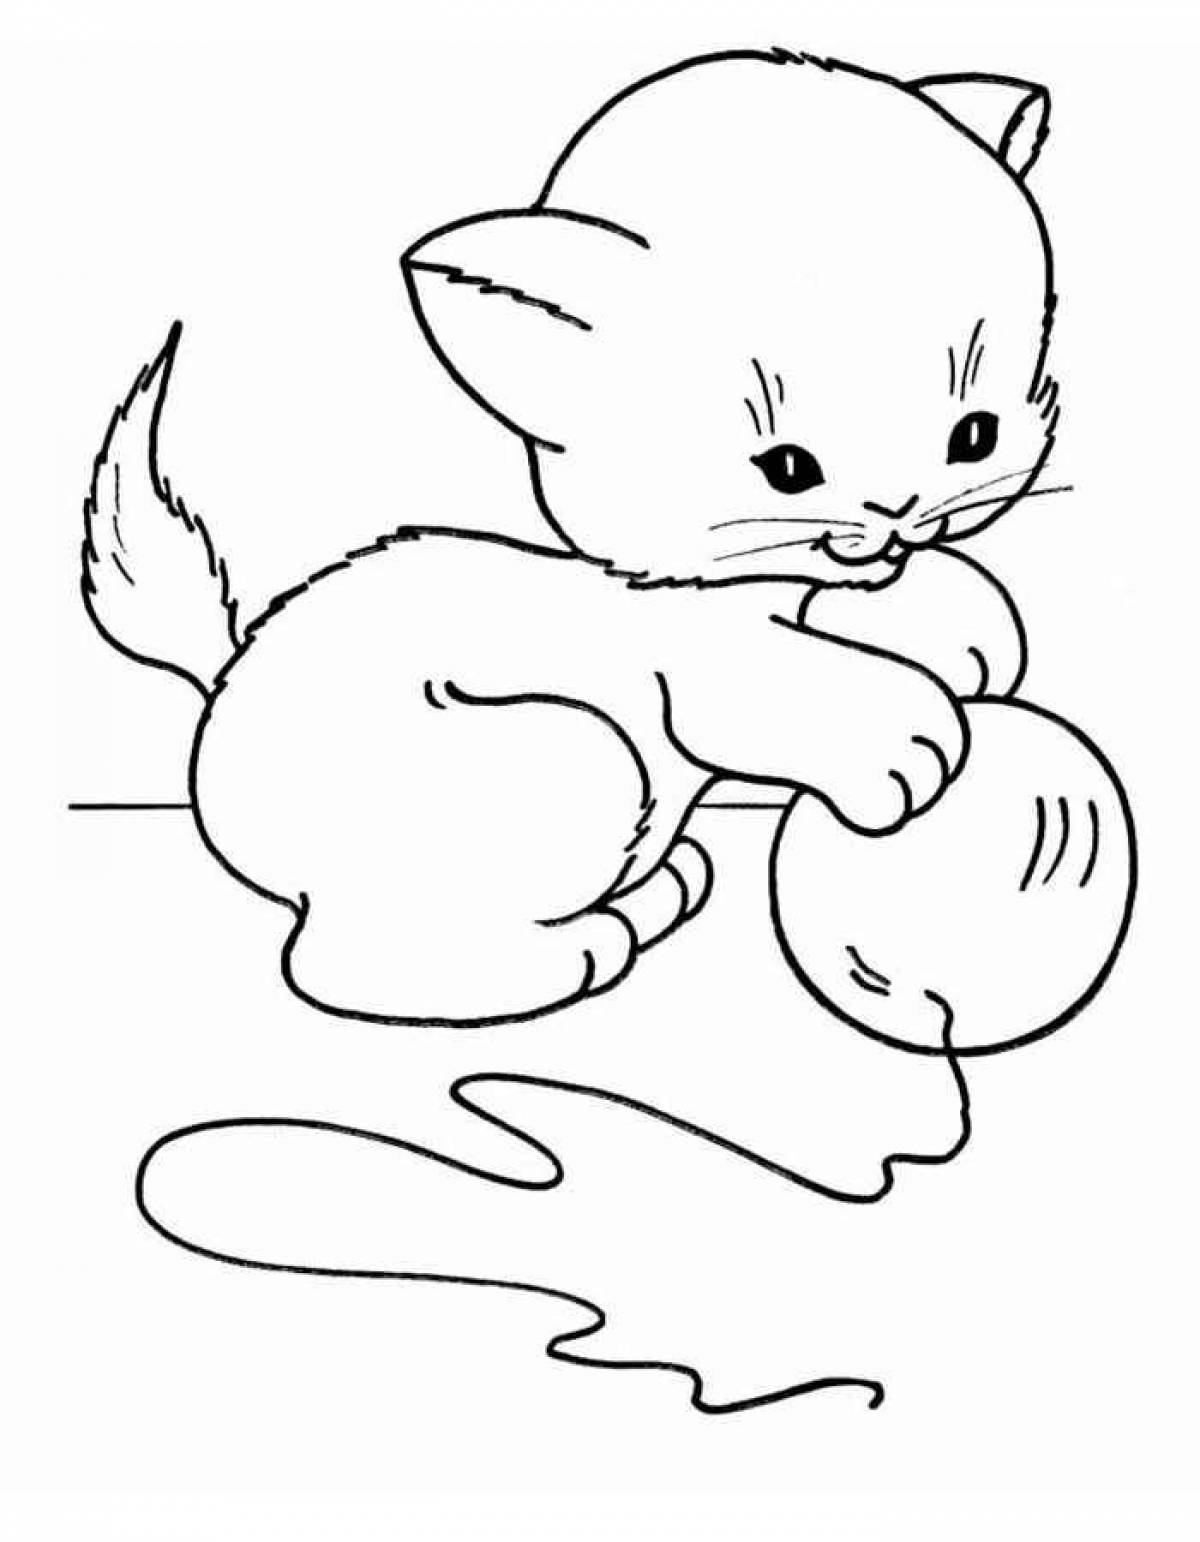 Delightful kitty coloring book